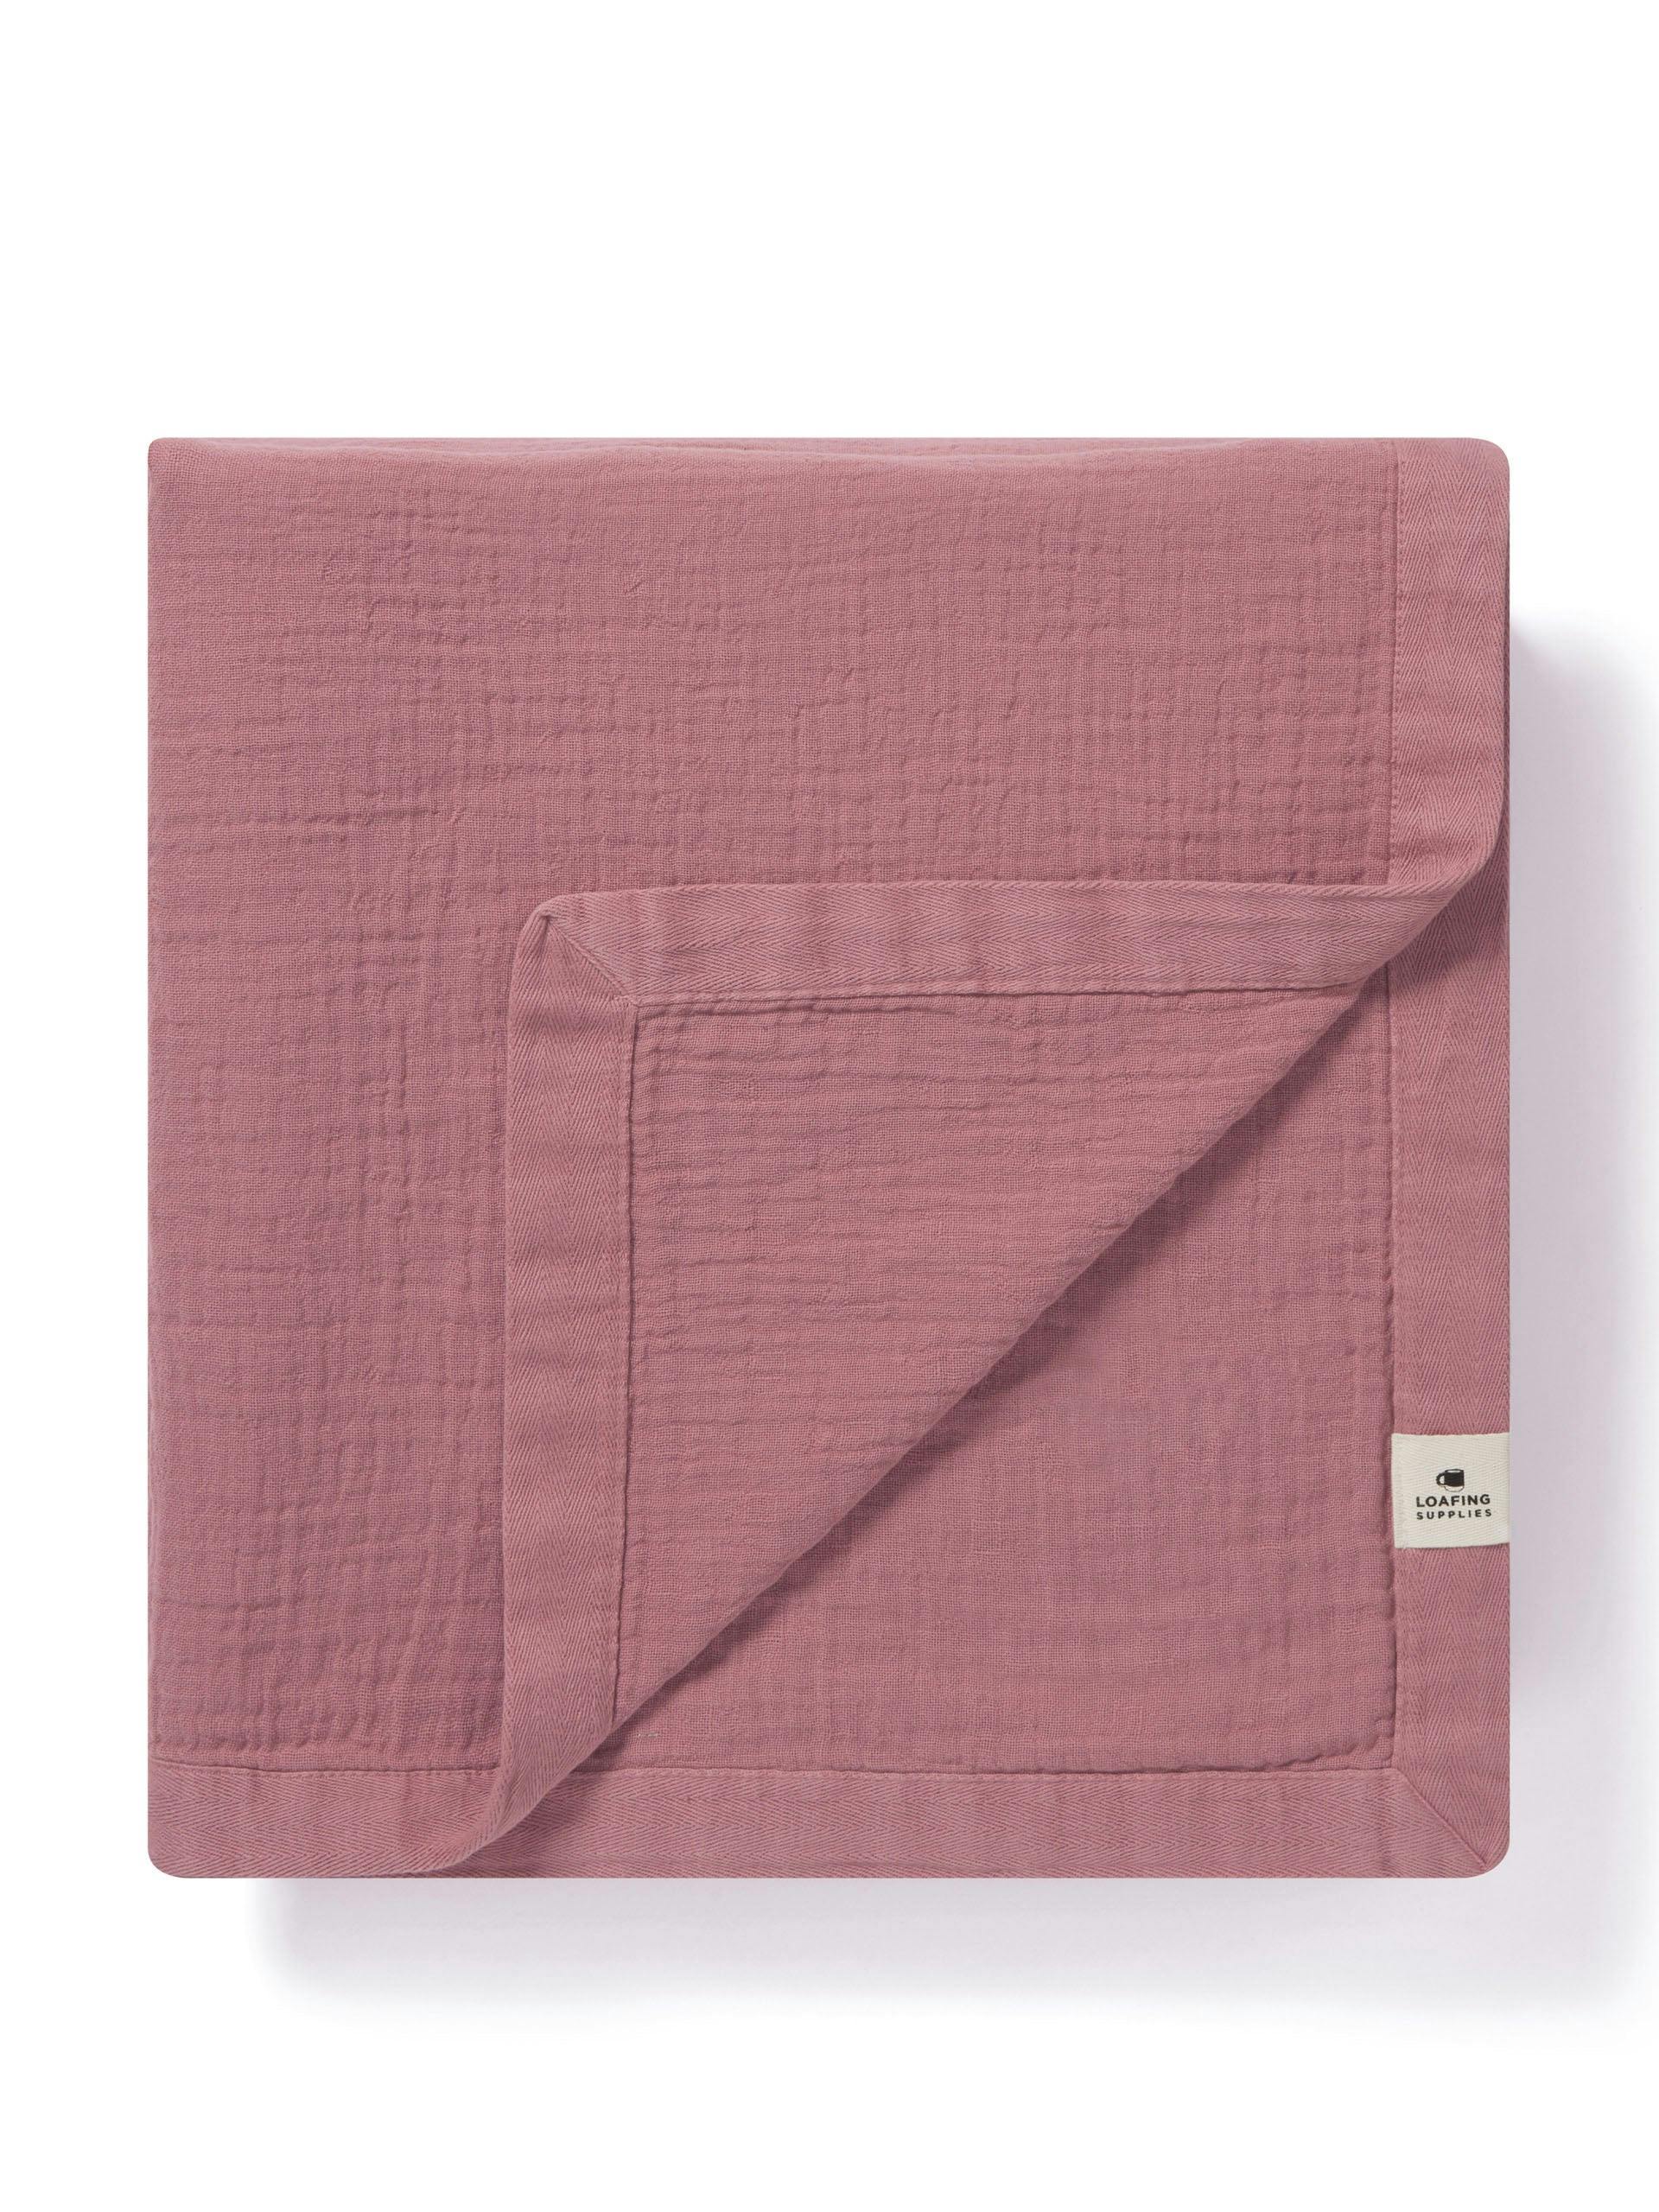 Pink drapy throw